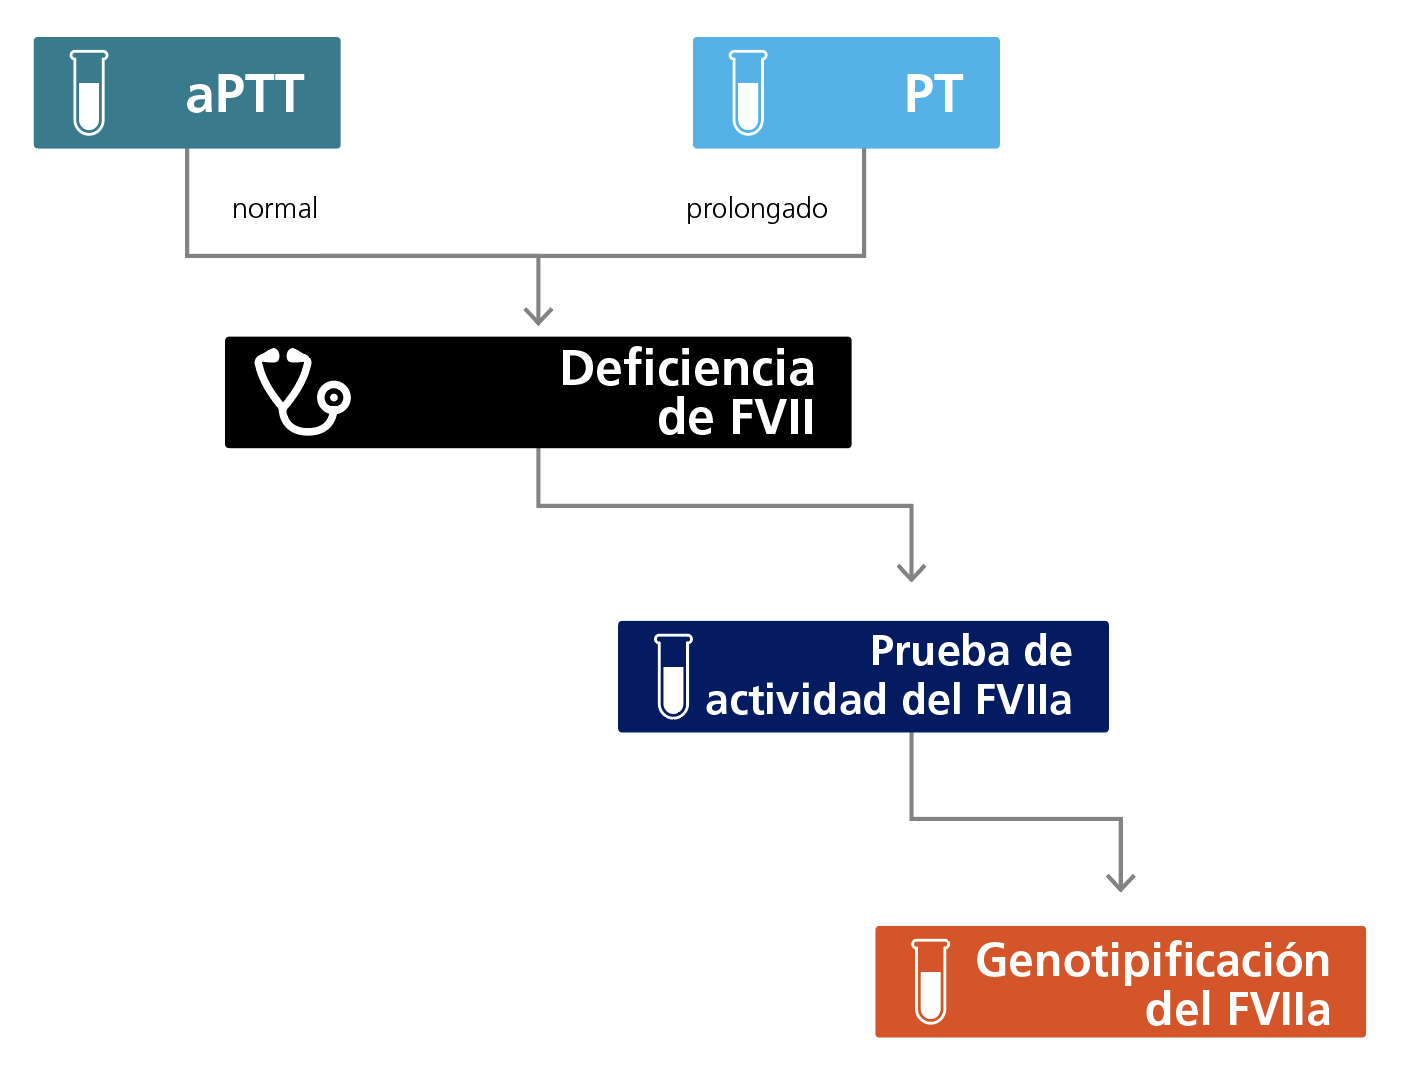 Algorithm for the laboratory diagnosis of FVII deficiency